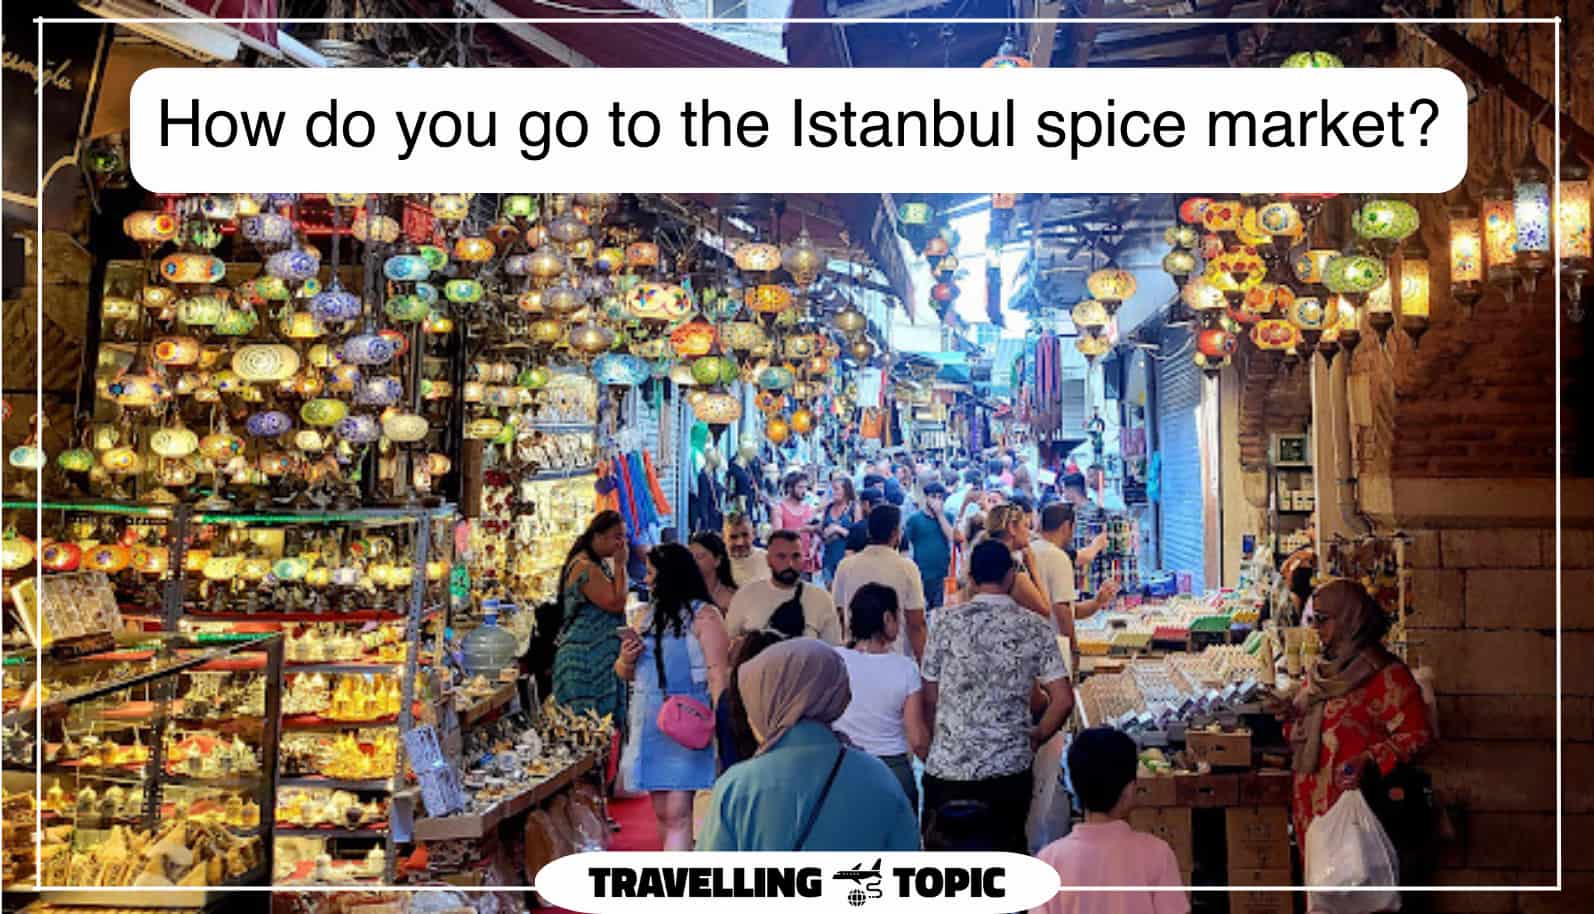 How do you go to the Istanbul spice market